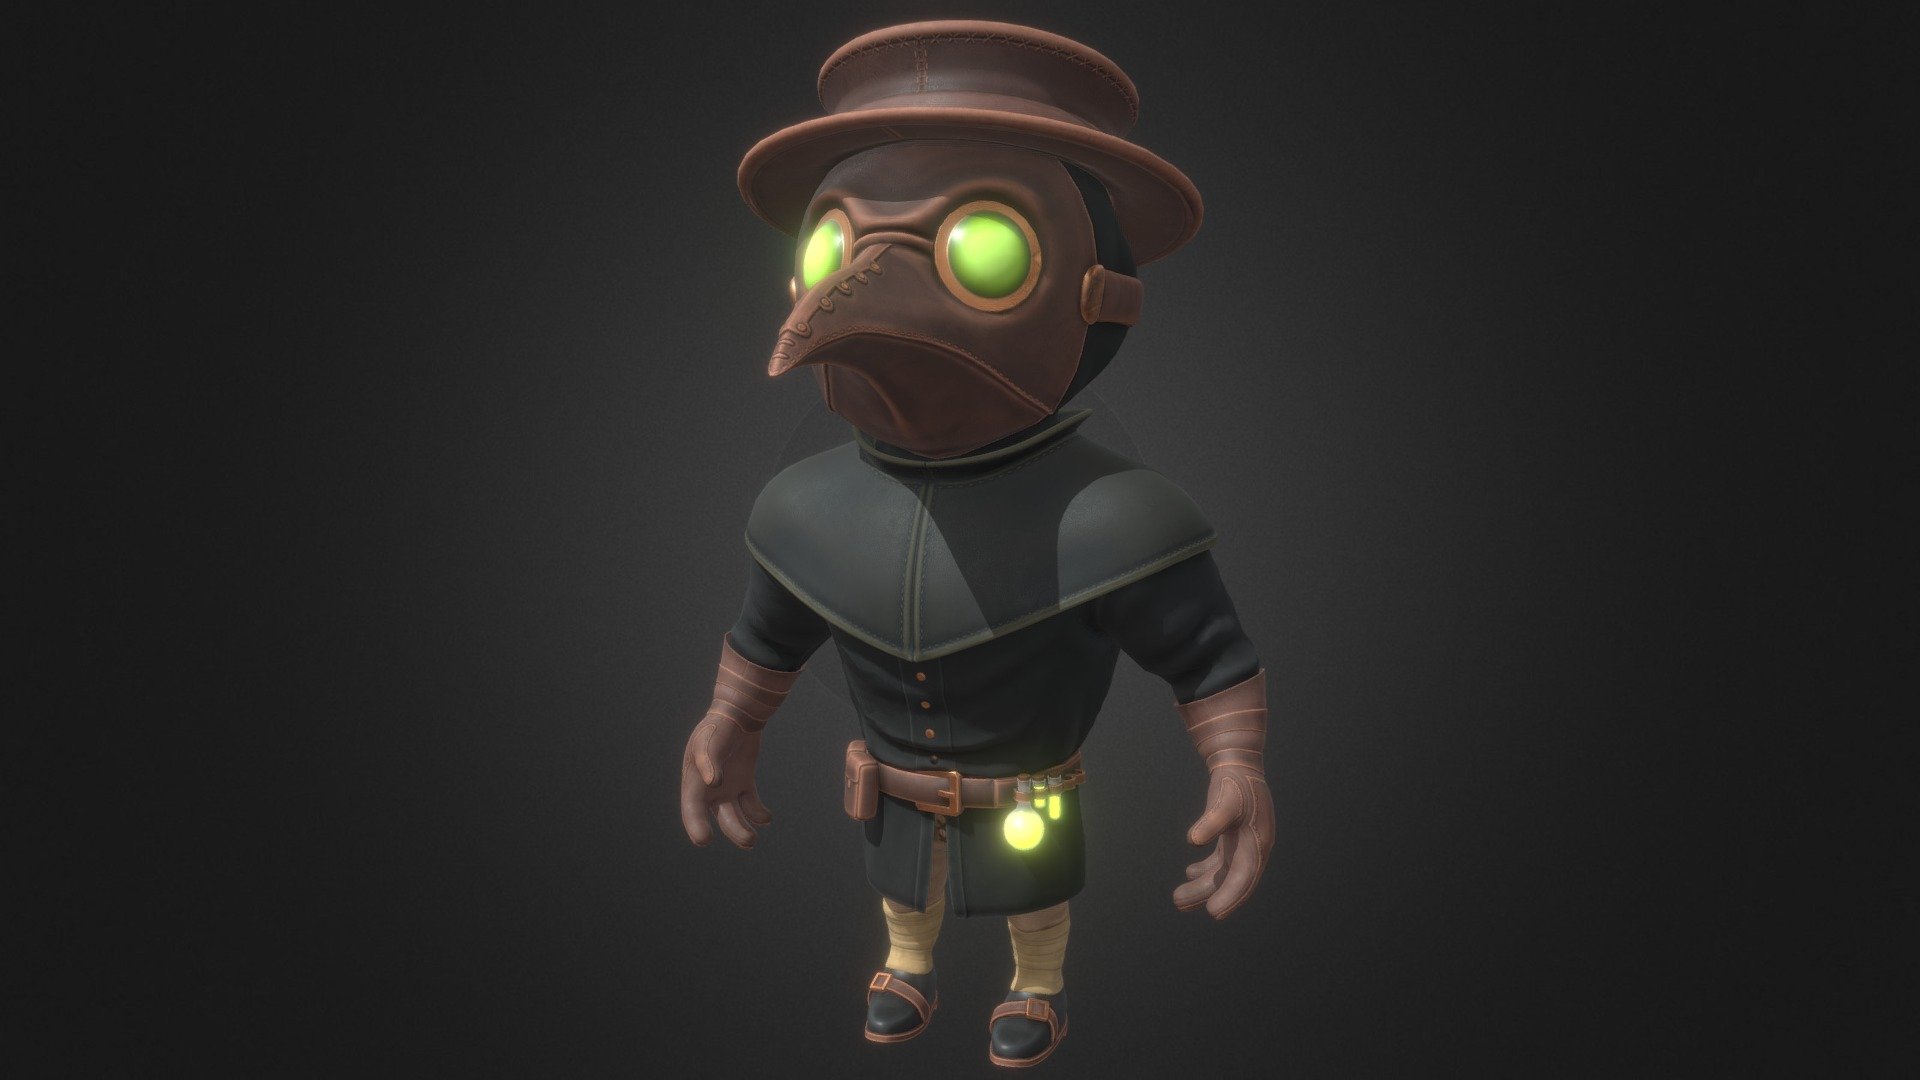 Heres the latest outfit I've created inspired by the recent pandemic events, players will now be able to stay safe with this plague doctor outfit 3d model